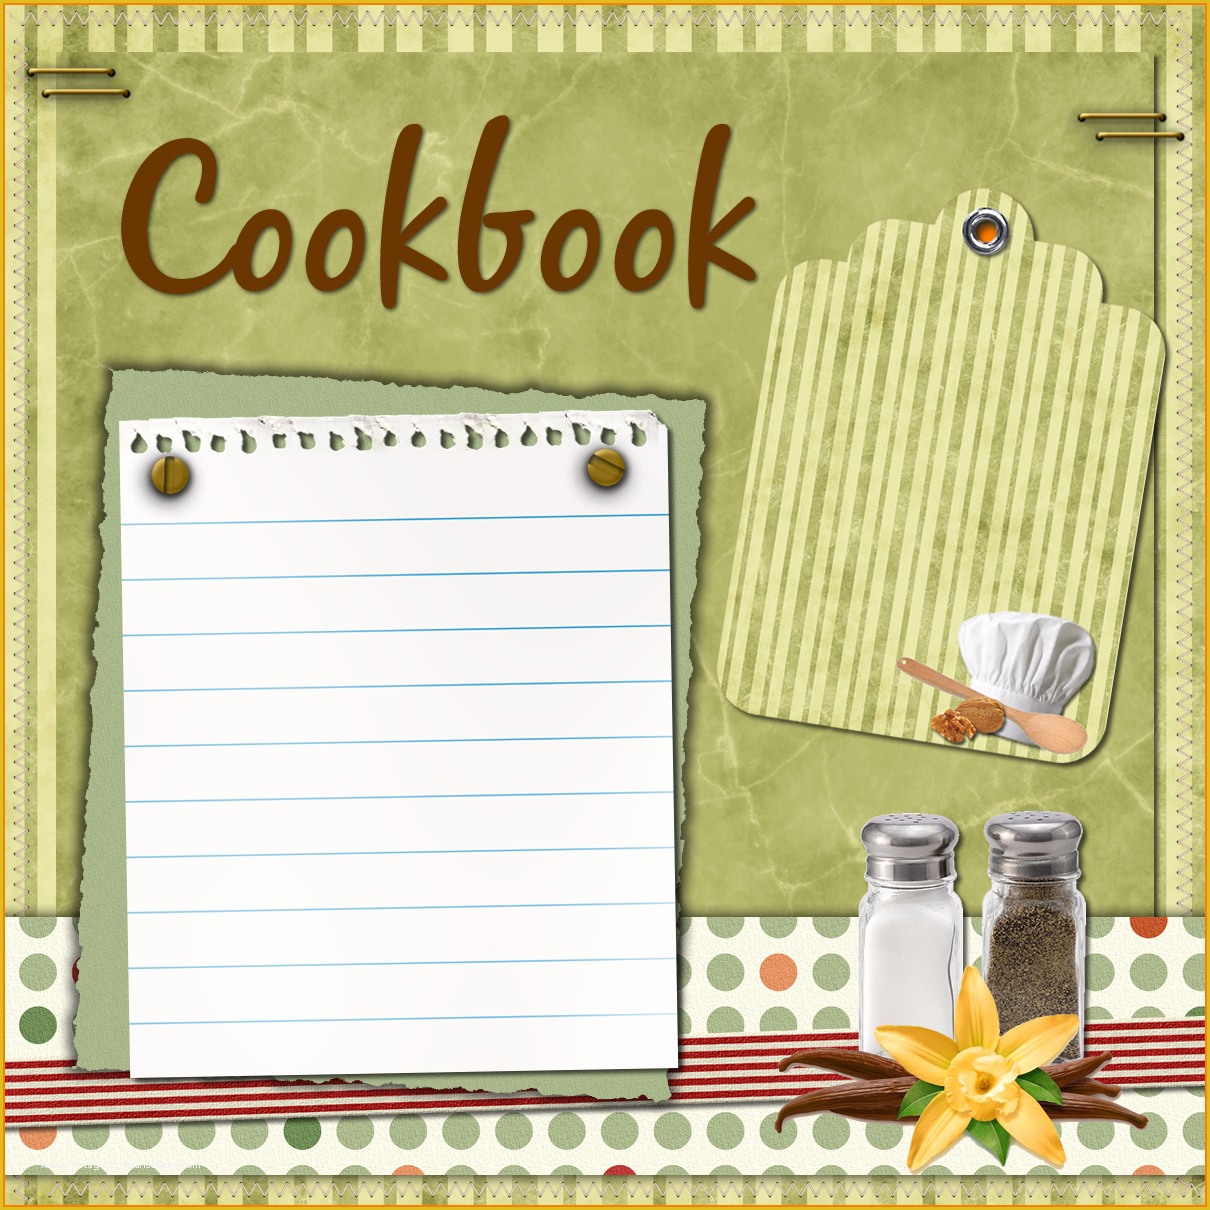 Cookbook Page Template Free Of Cookbook Cover Template